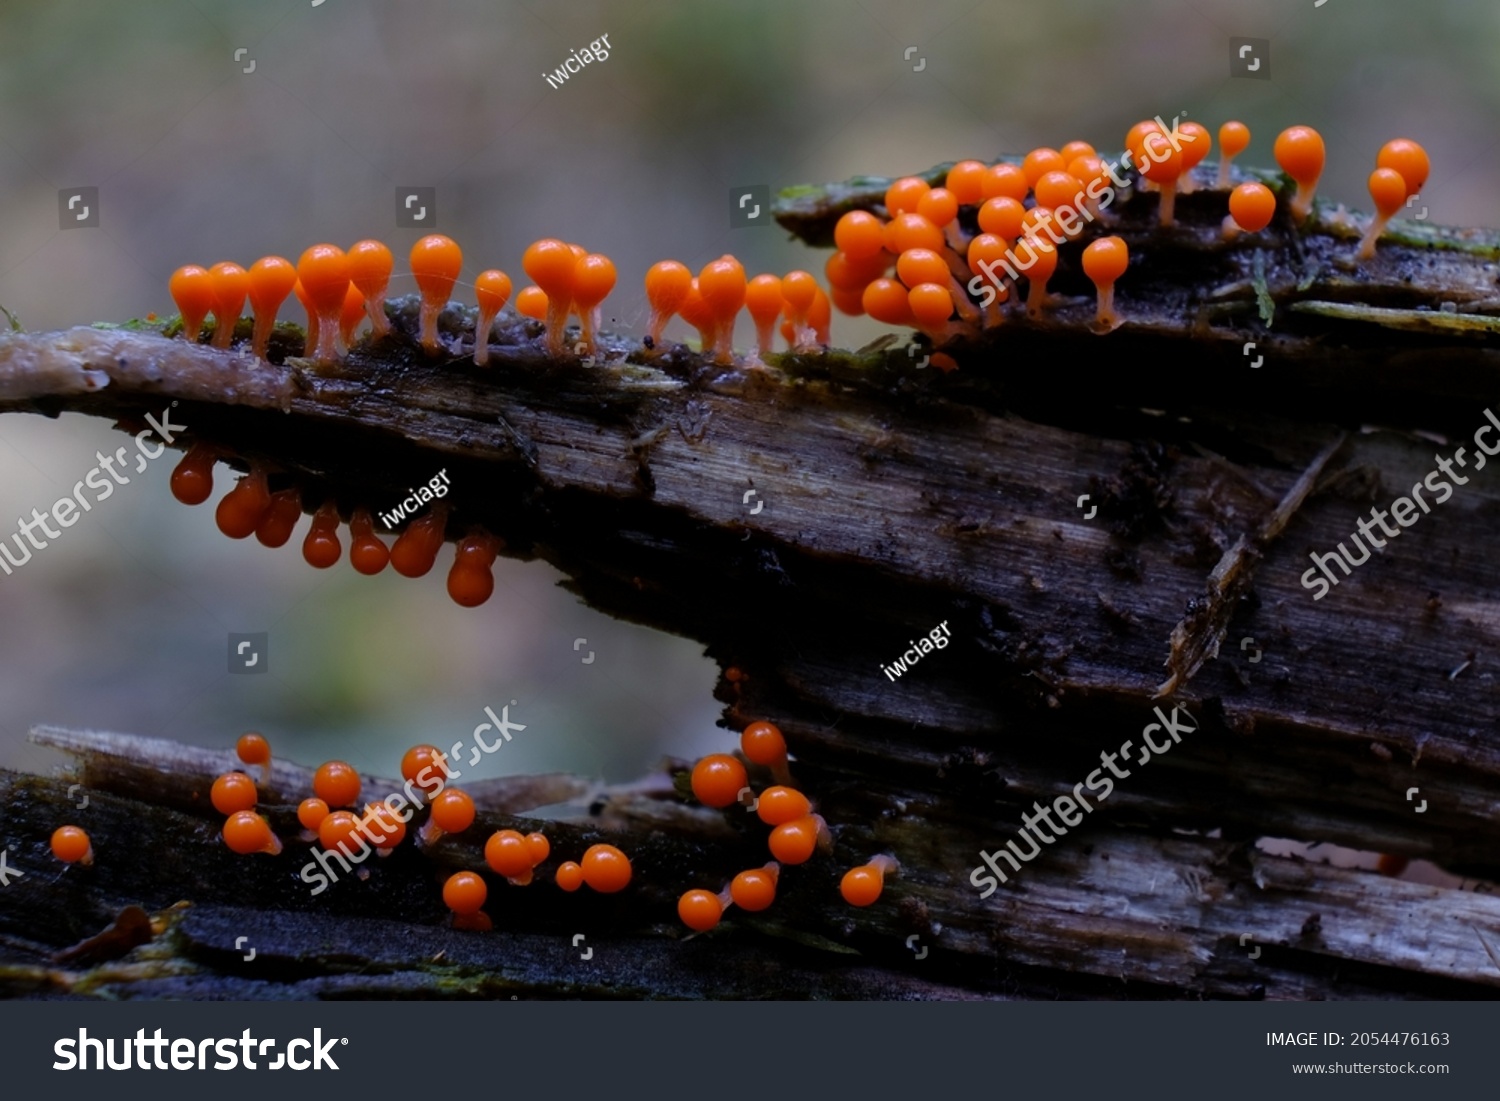 Amazing colorful slime mold Trichia decipiens - slime molds are interesting organisms between mushrooms and animals #2054476163